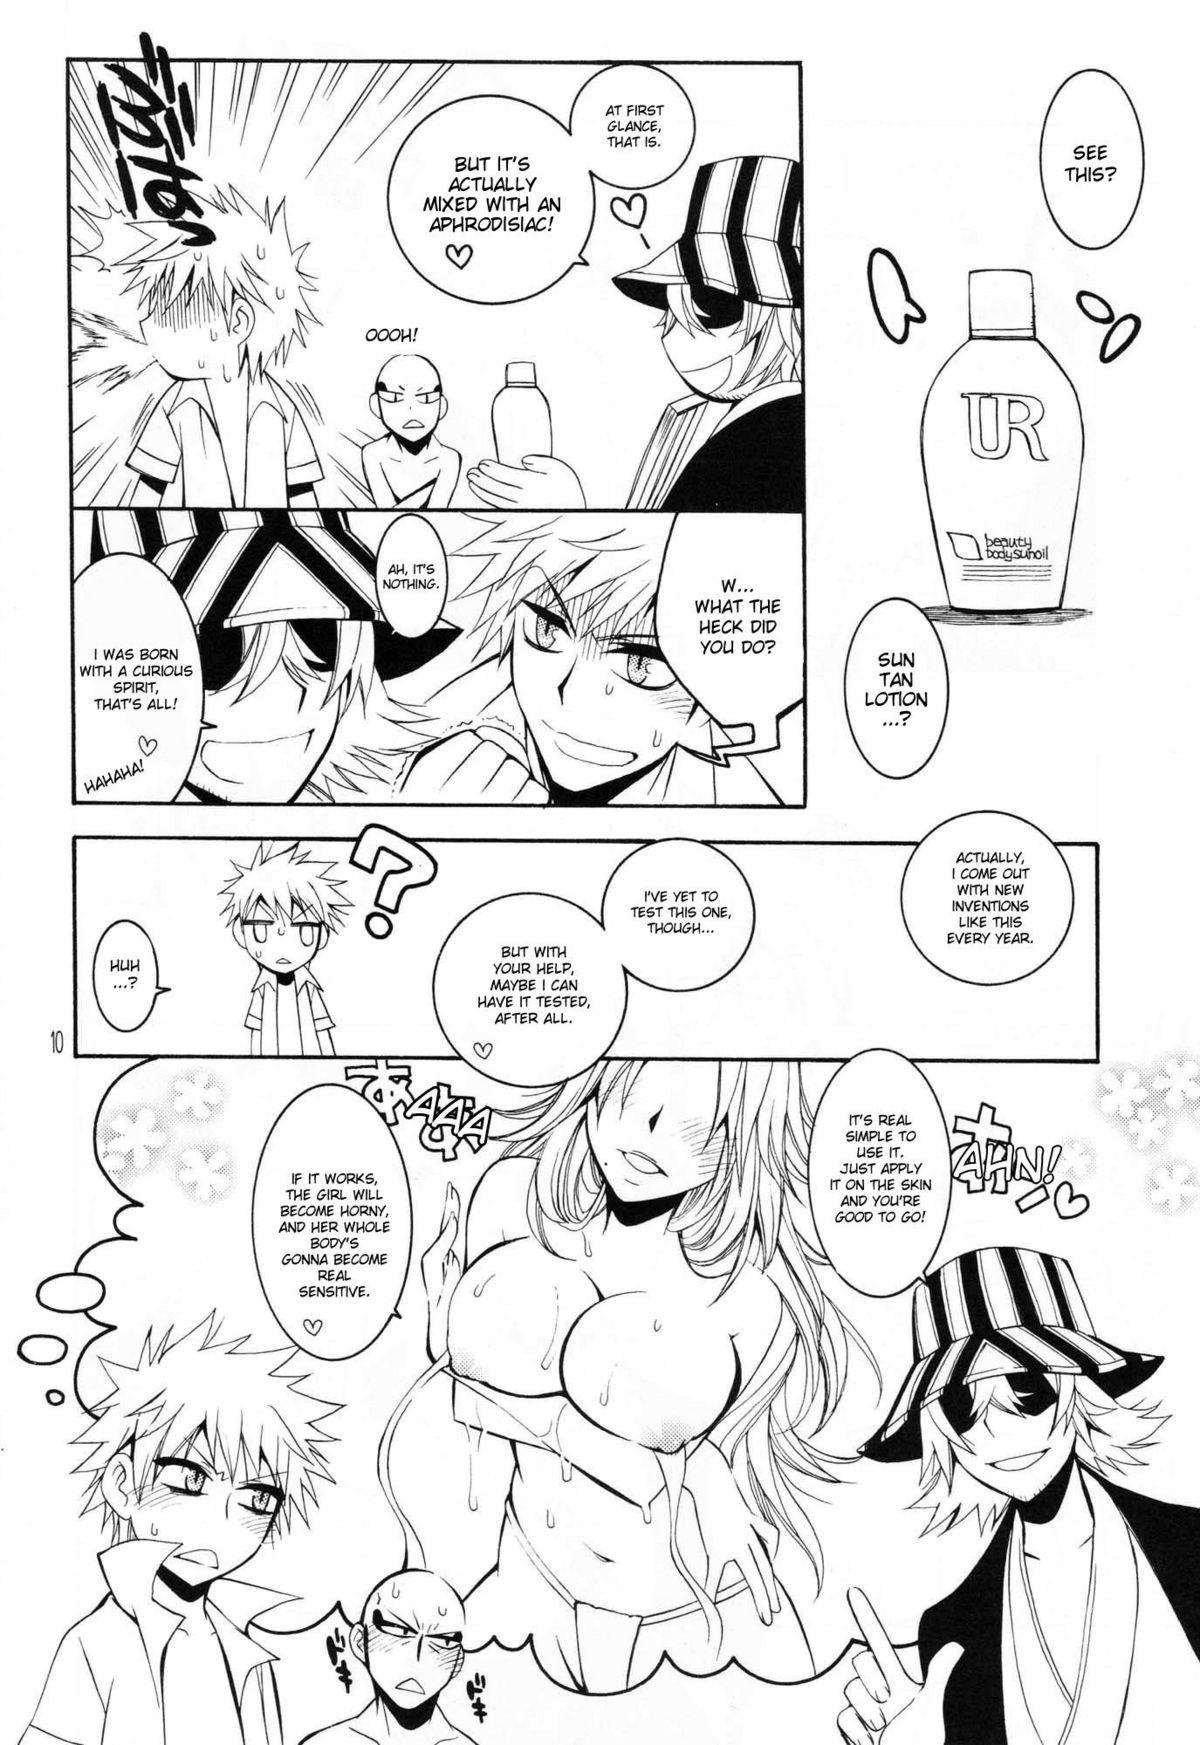 Playing Addict Shine - Bleach Suck - Page 9